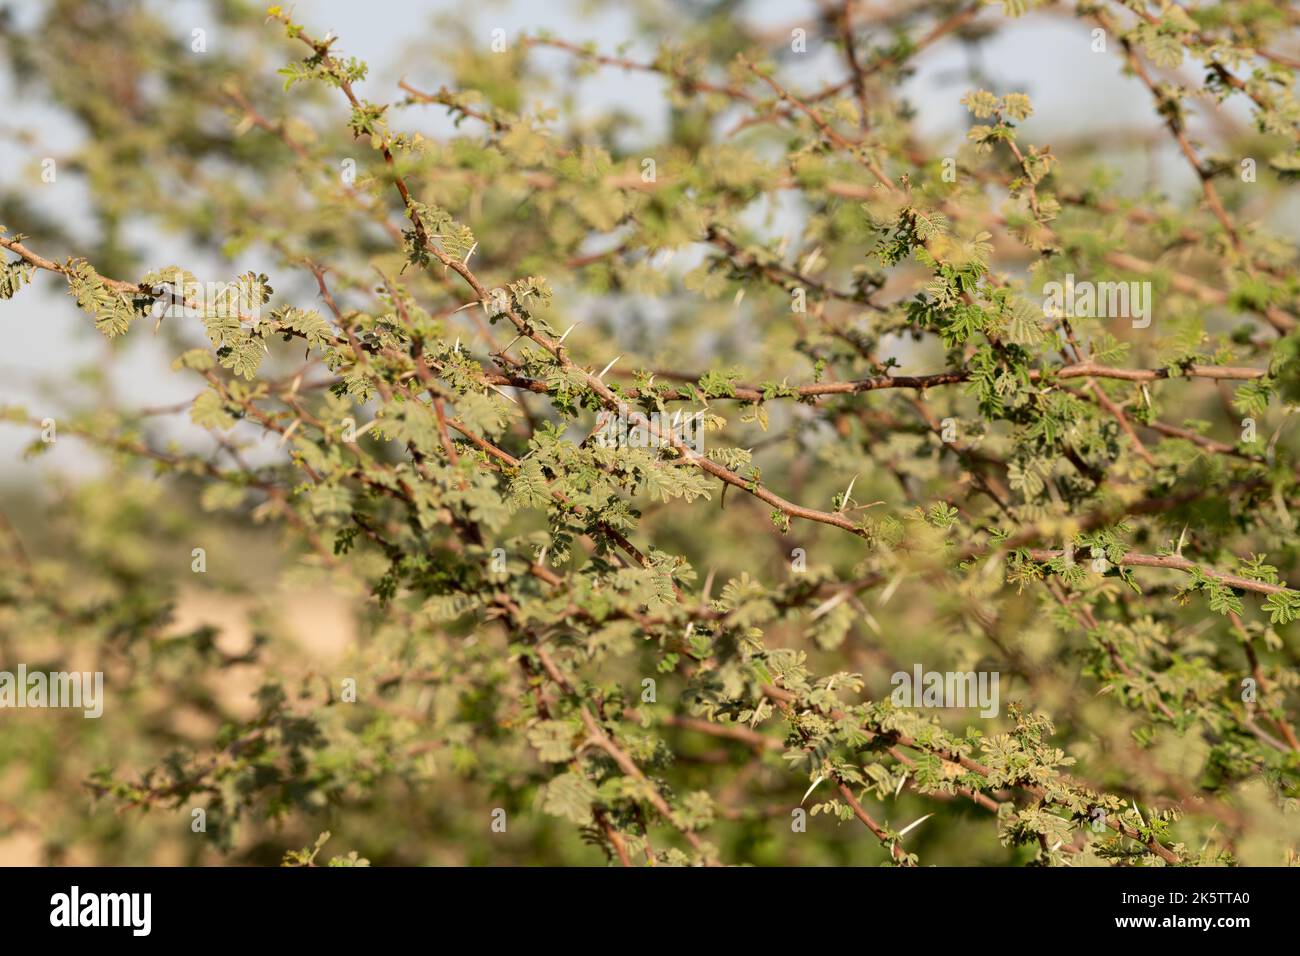 Close-up of a thorny acacia tree branches at the Al Marmoom desert conservation reserve at Al Qudra in Dubai, United Arab Emirates. Stock Photo